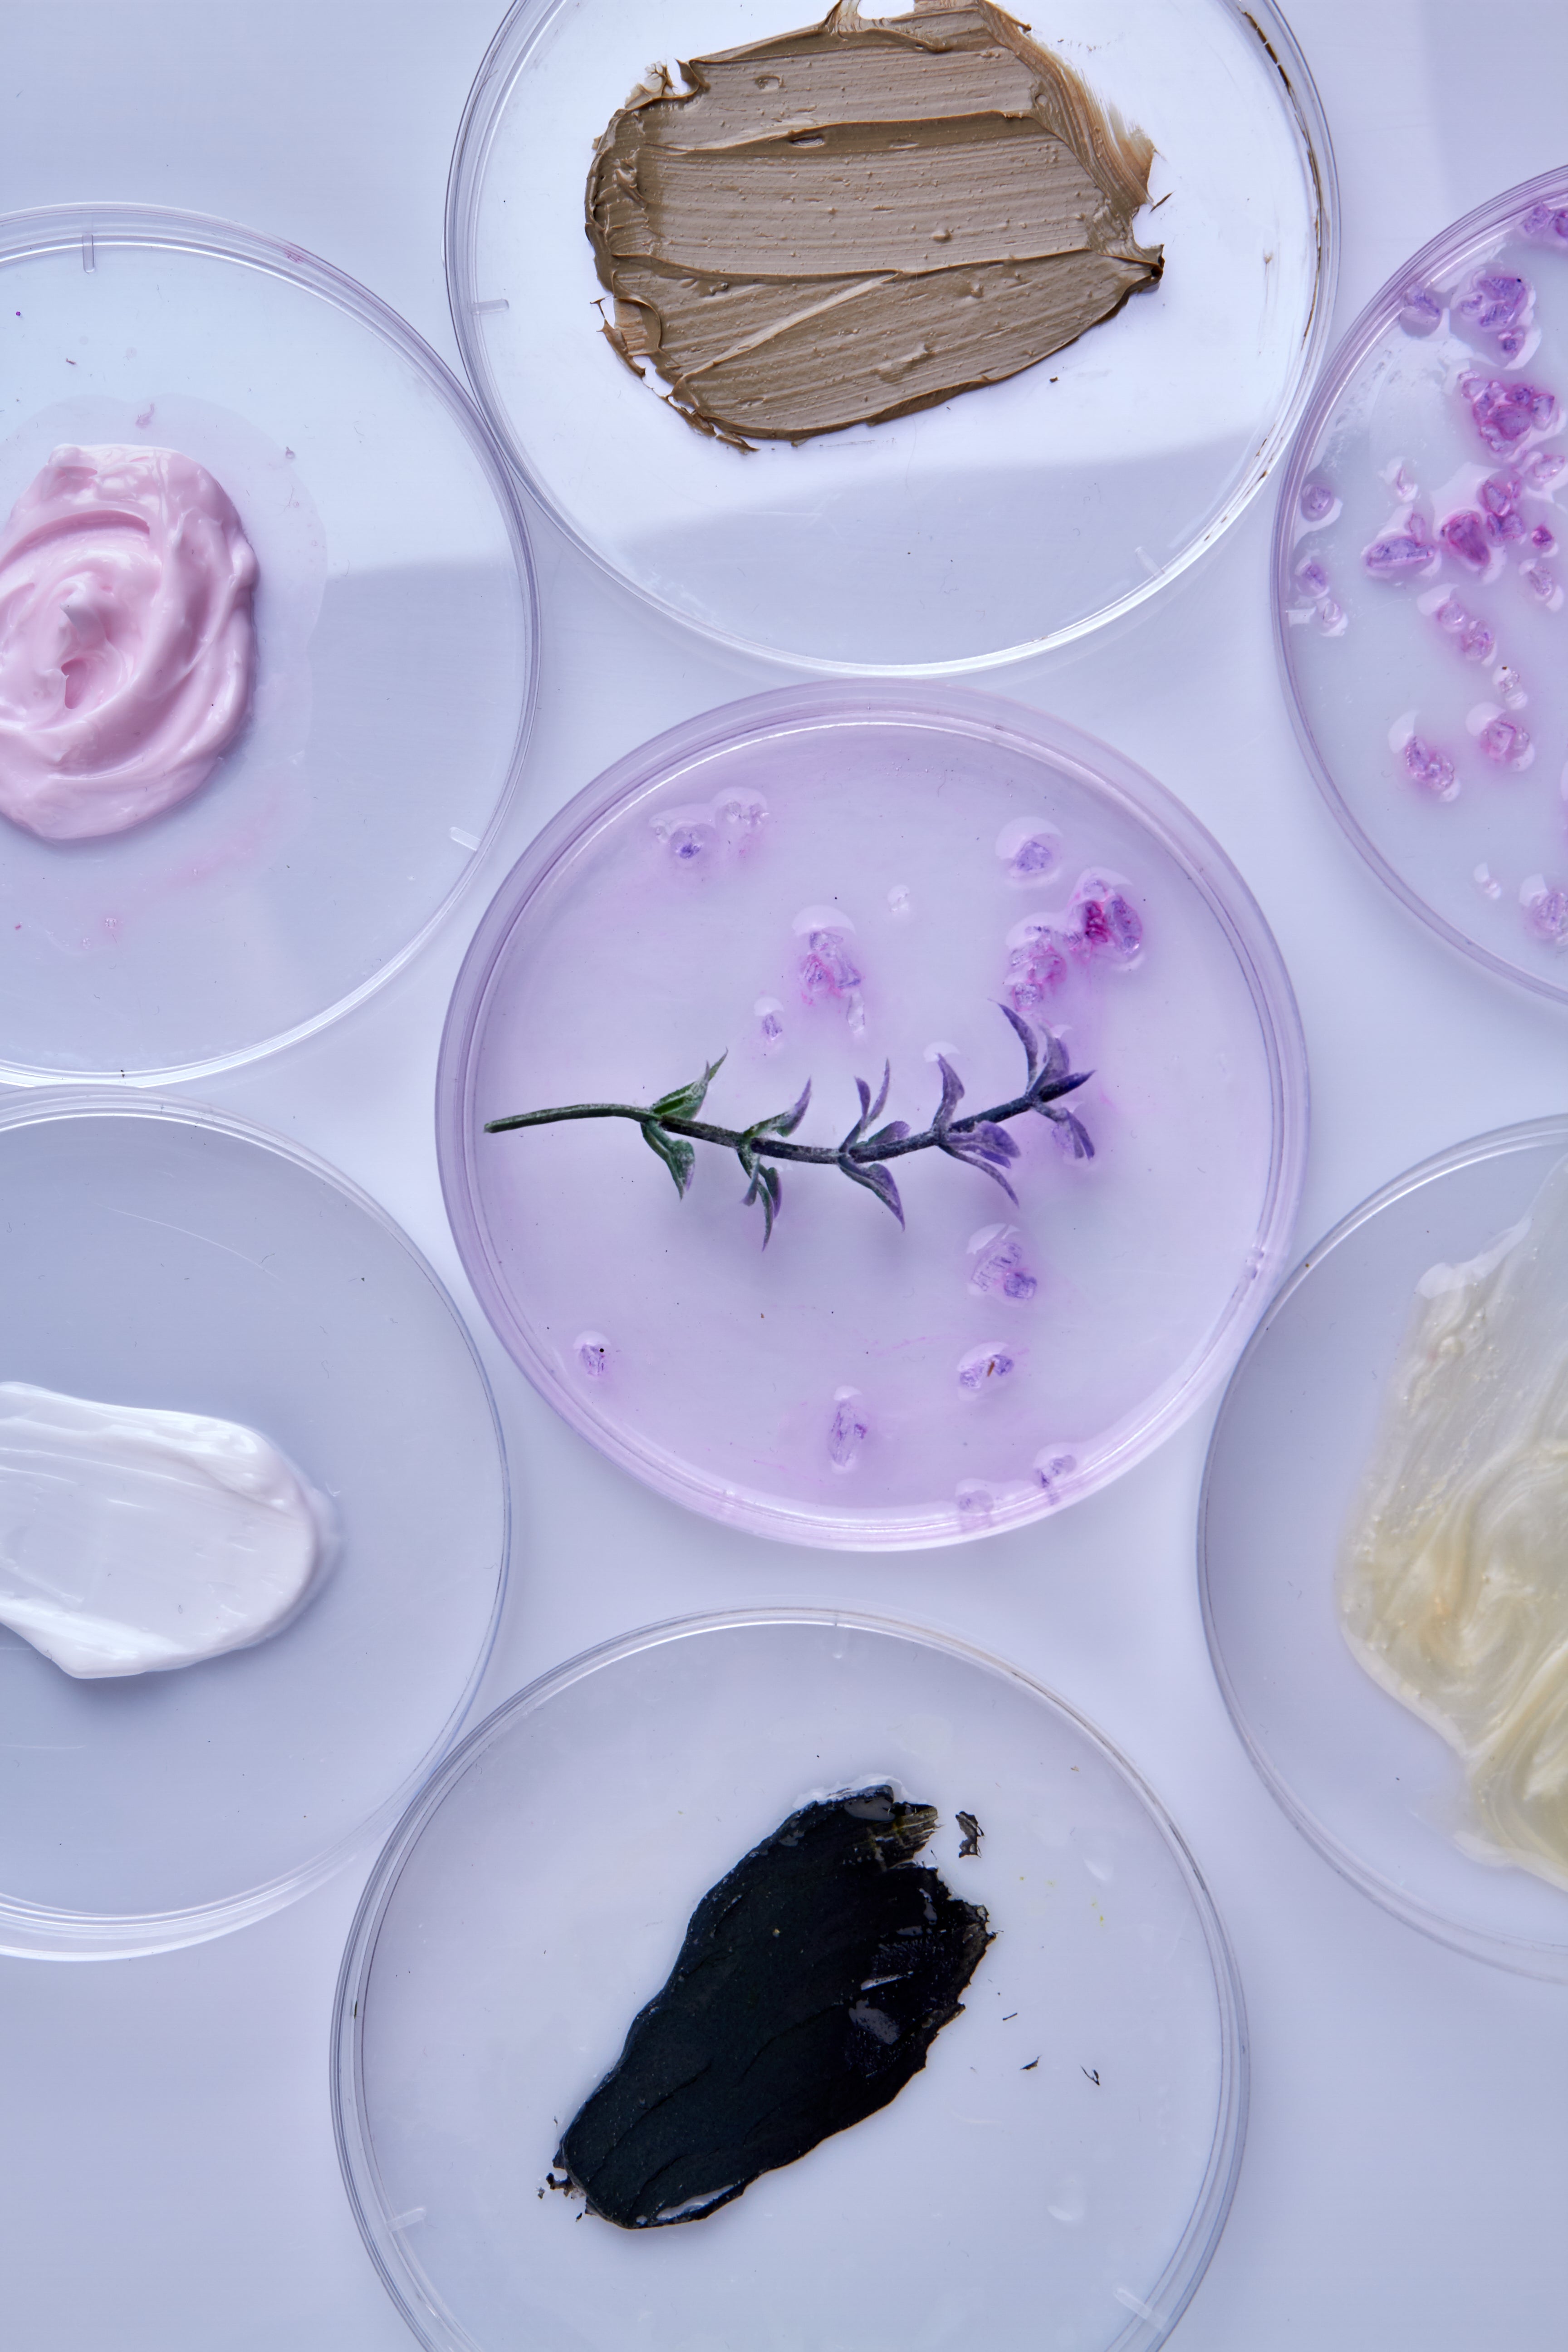 Top view of green herb in a purple petri dish surrounded by other dishes containing various cream samples